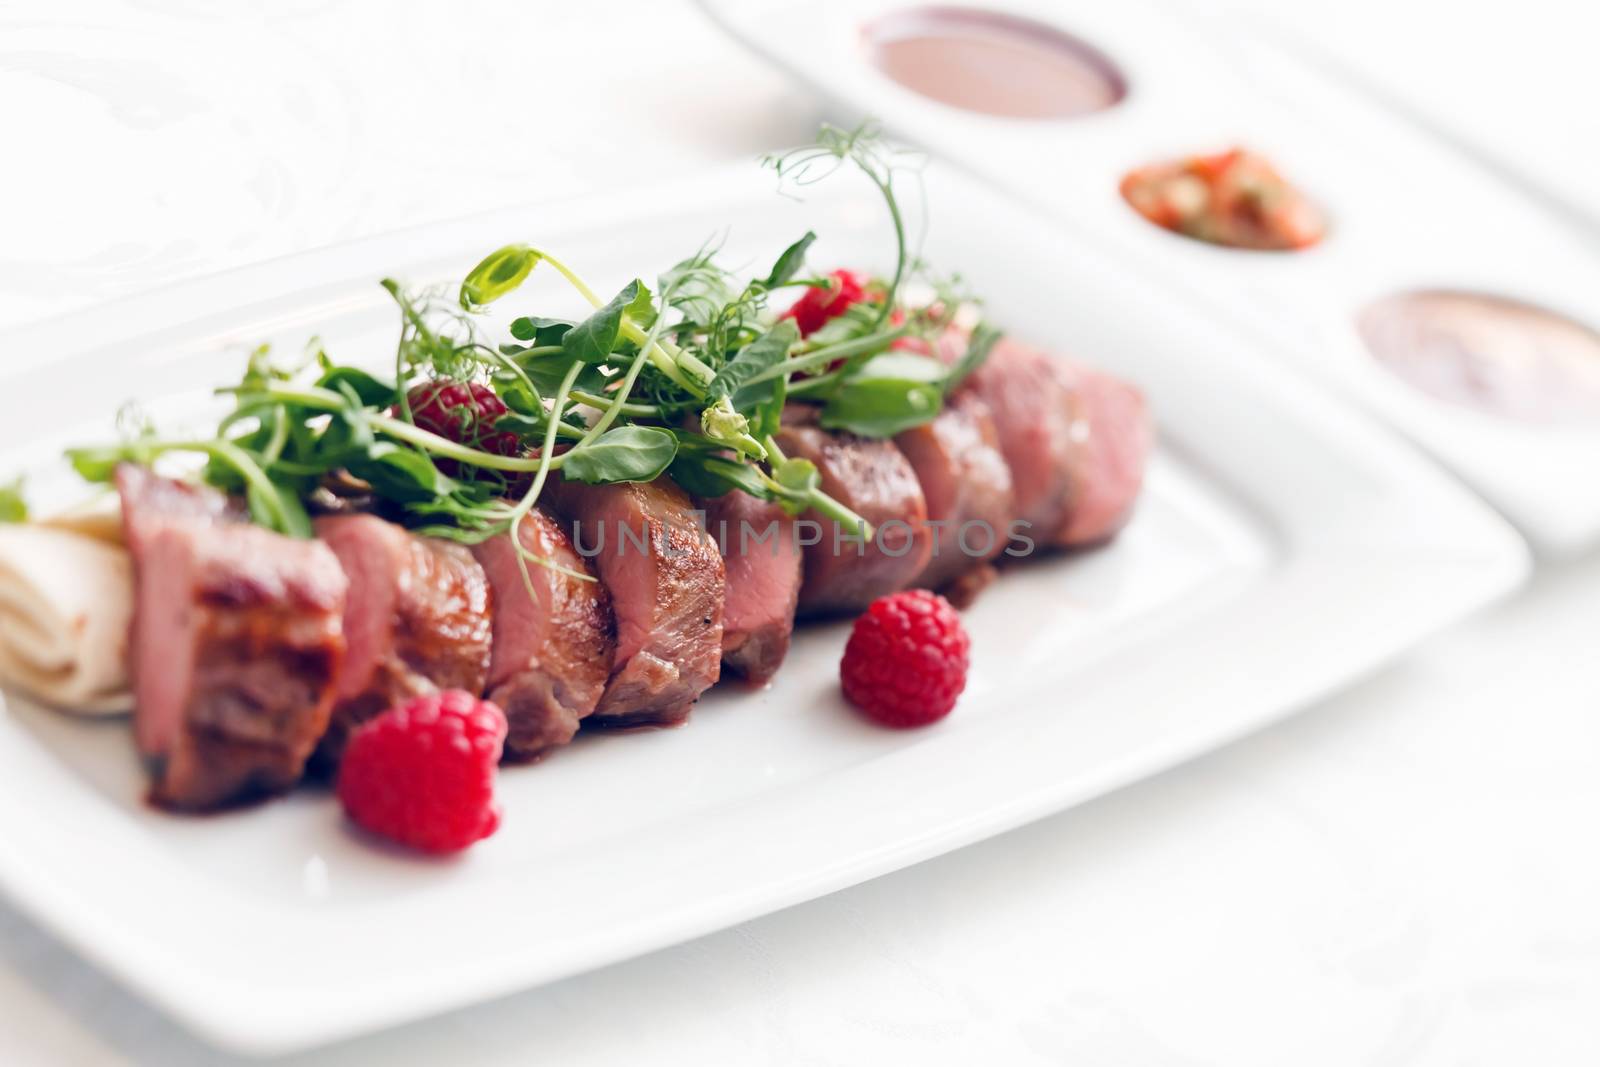 grilled duck breast covered with sweet red fruit sauce by shebeko